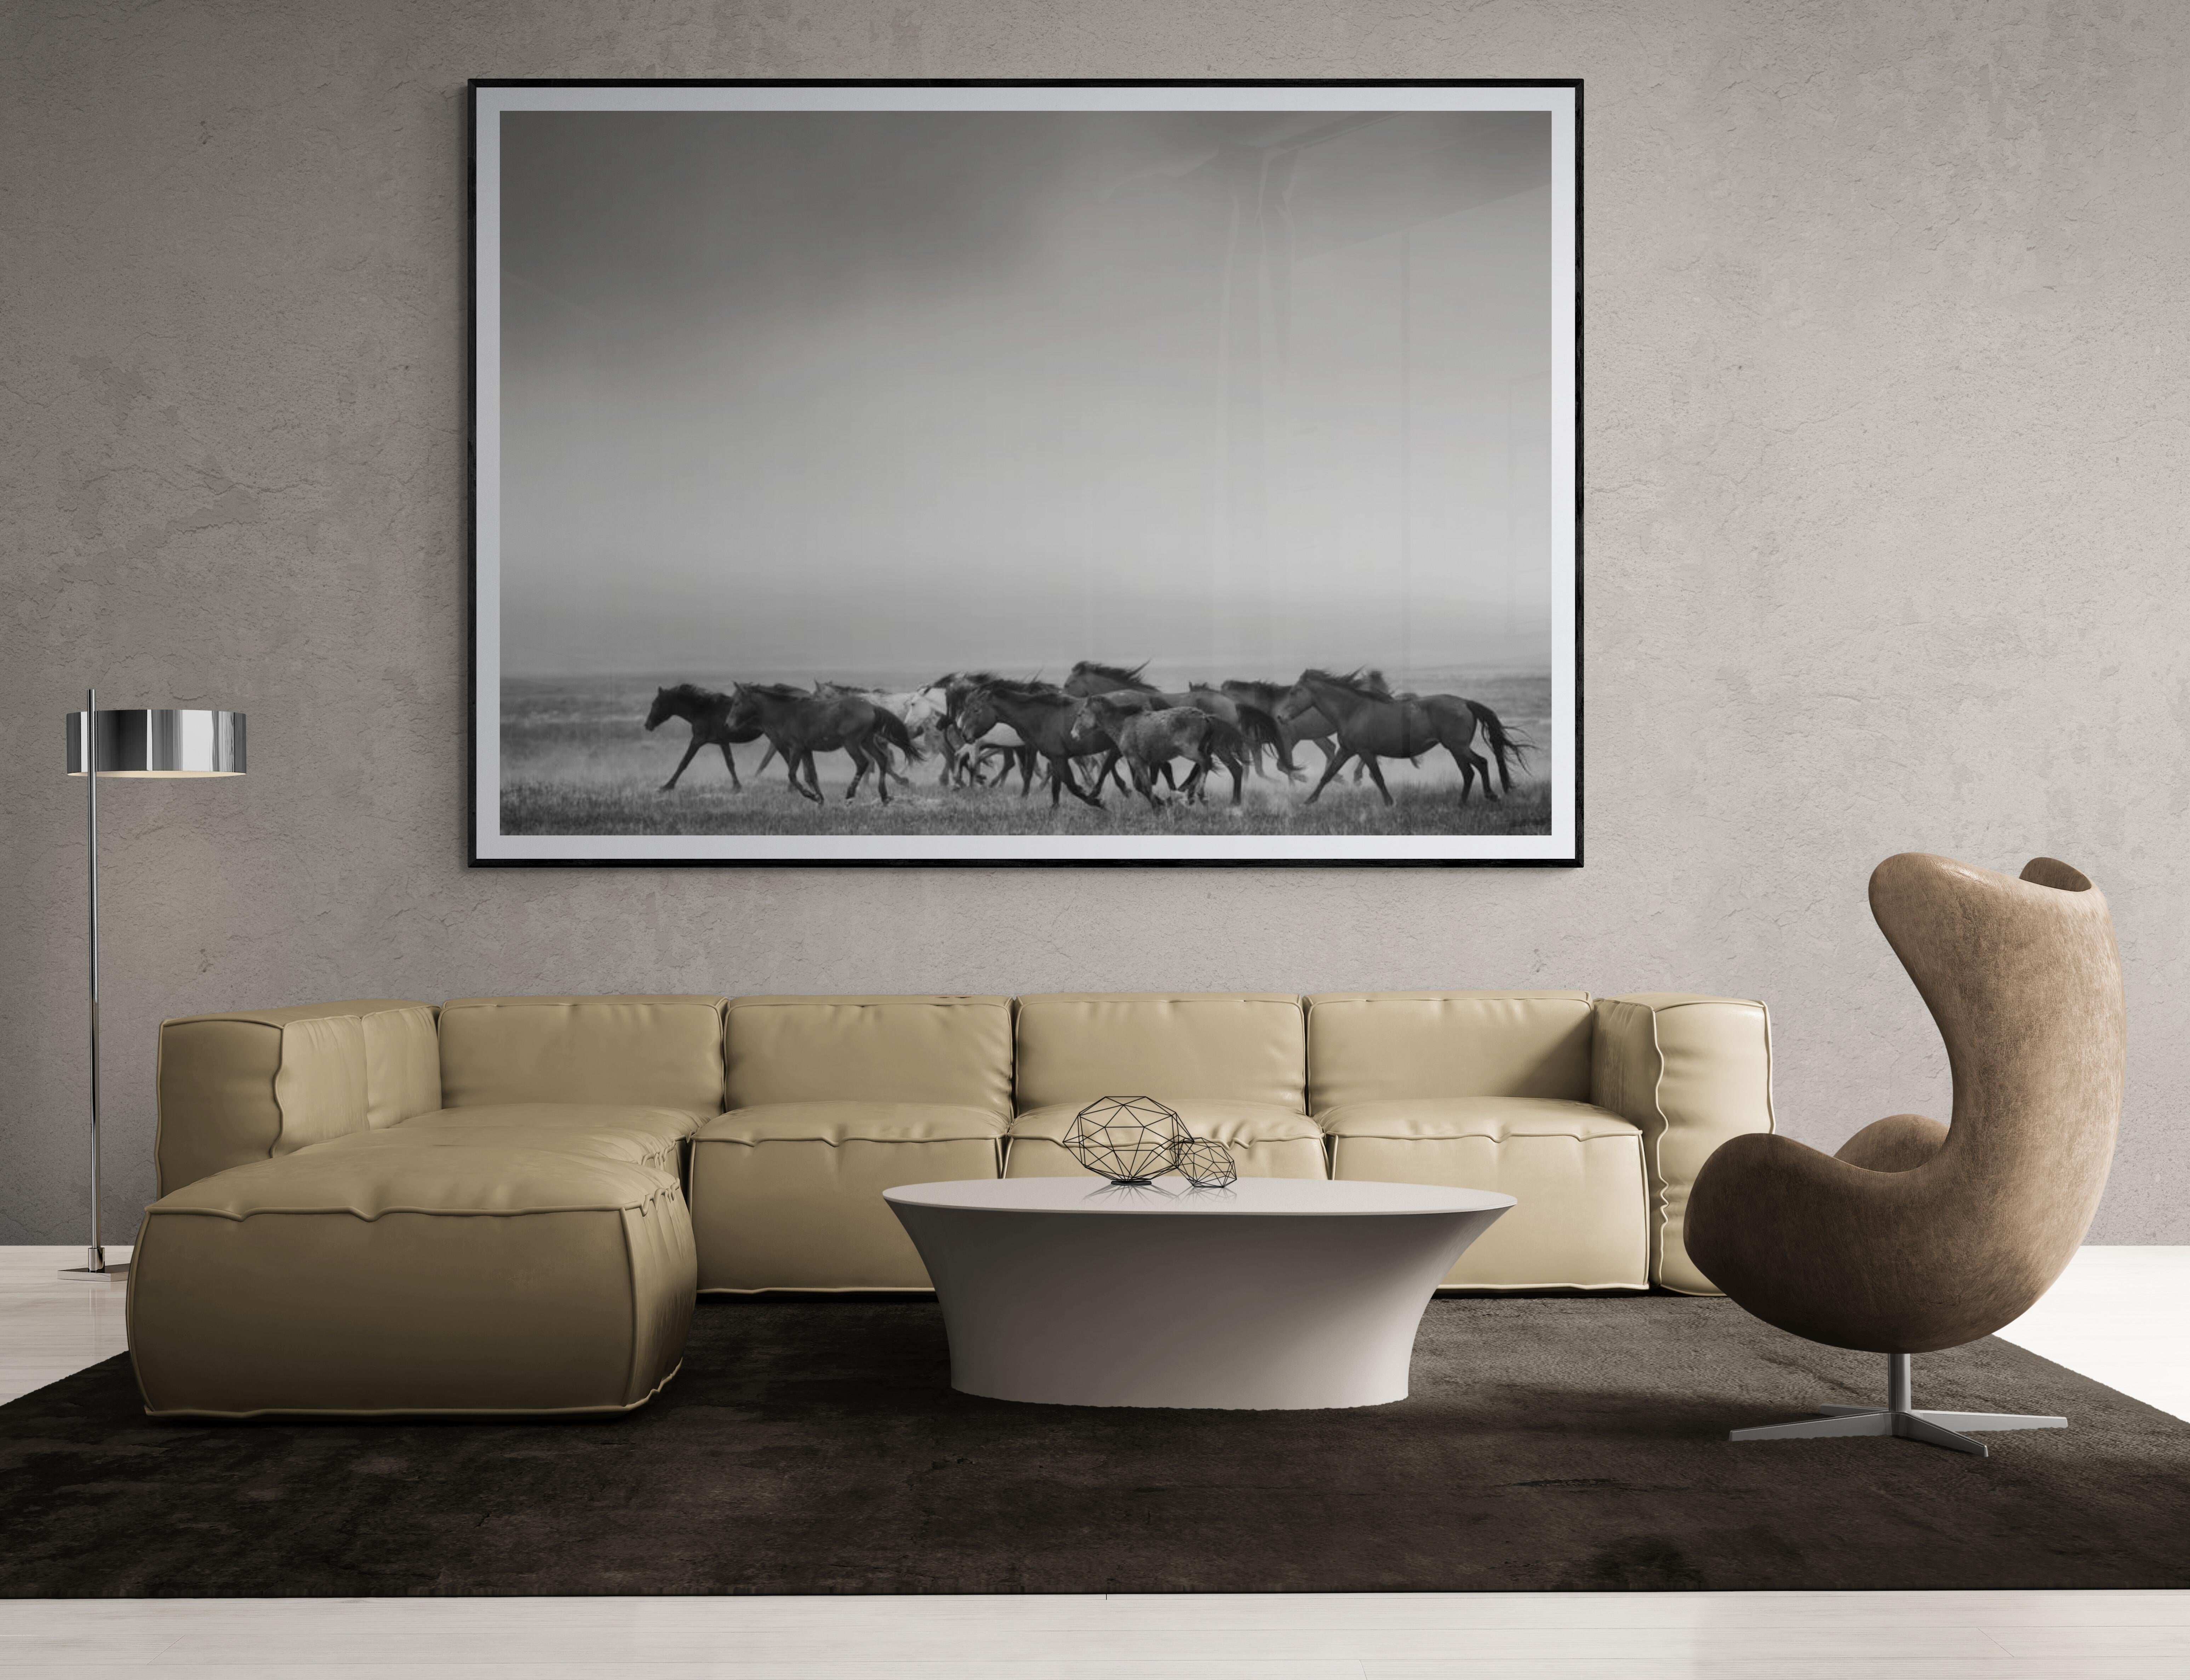 This is a black and white photograph of American Wild Mustangs by Shane Russeck. 
Printed on Archival Paper Using Archival ink
Singed and Numbered Edition of 5

 Shane Russeck has built a reputation for capturing America's landscapes, cultures and